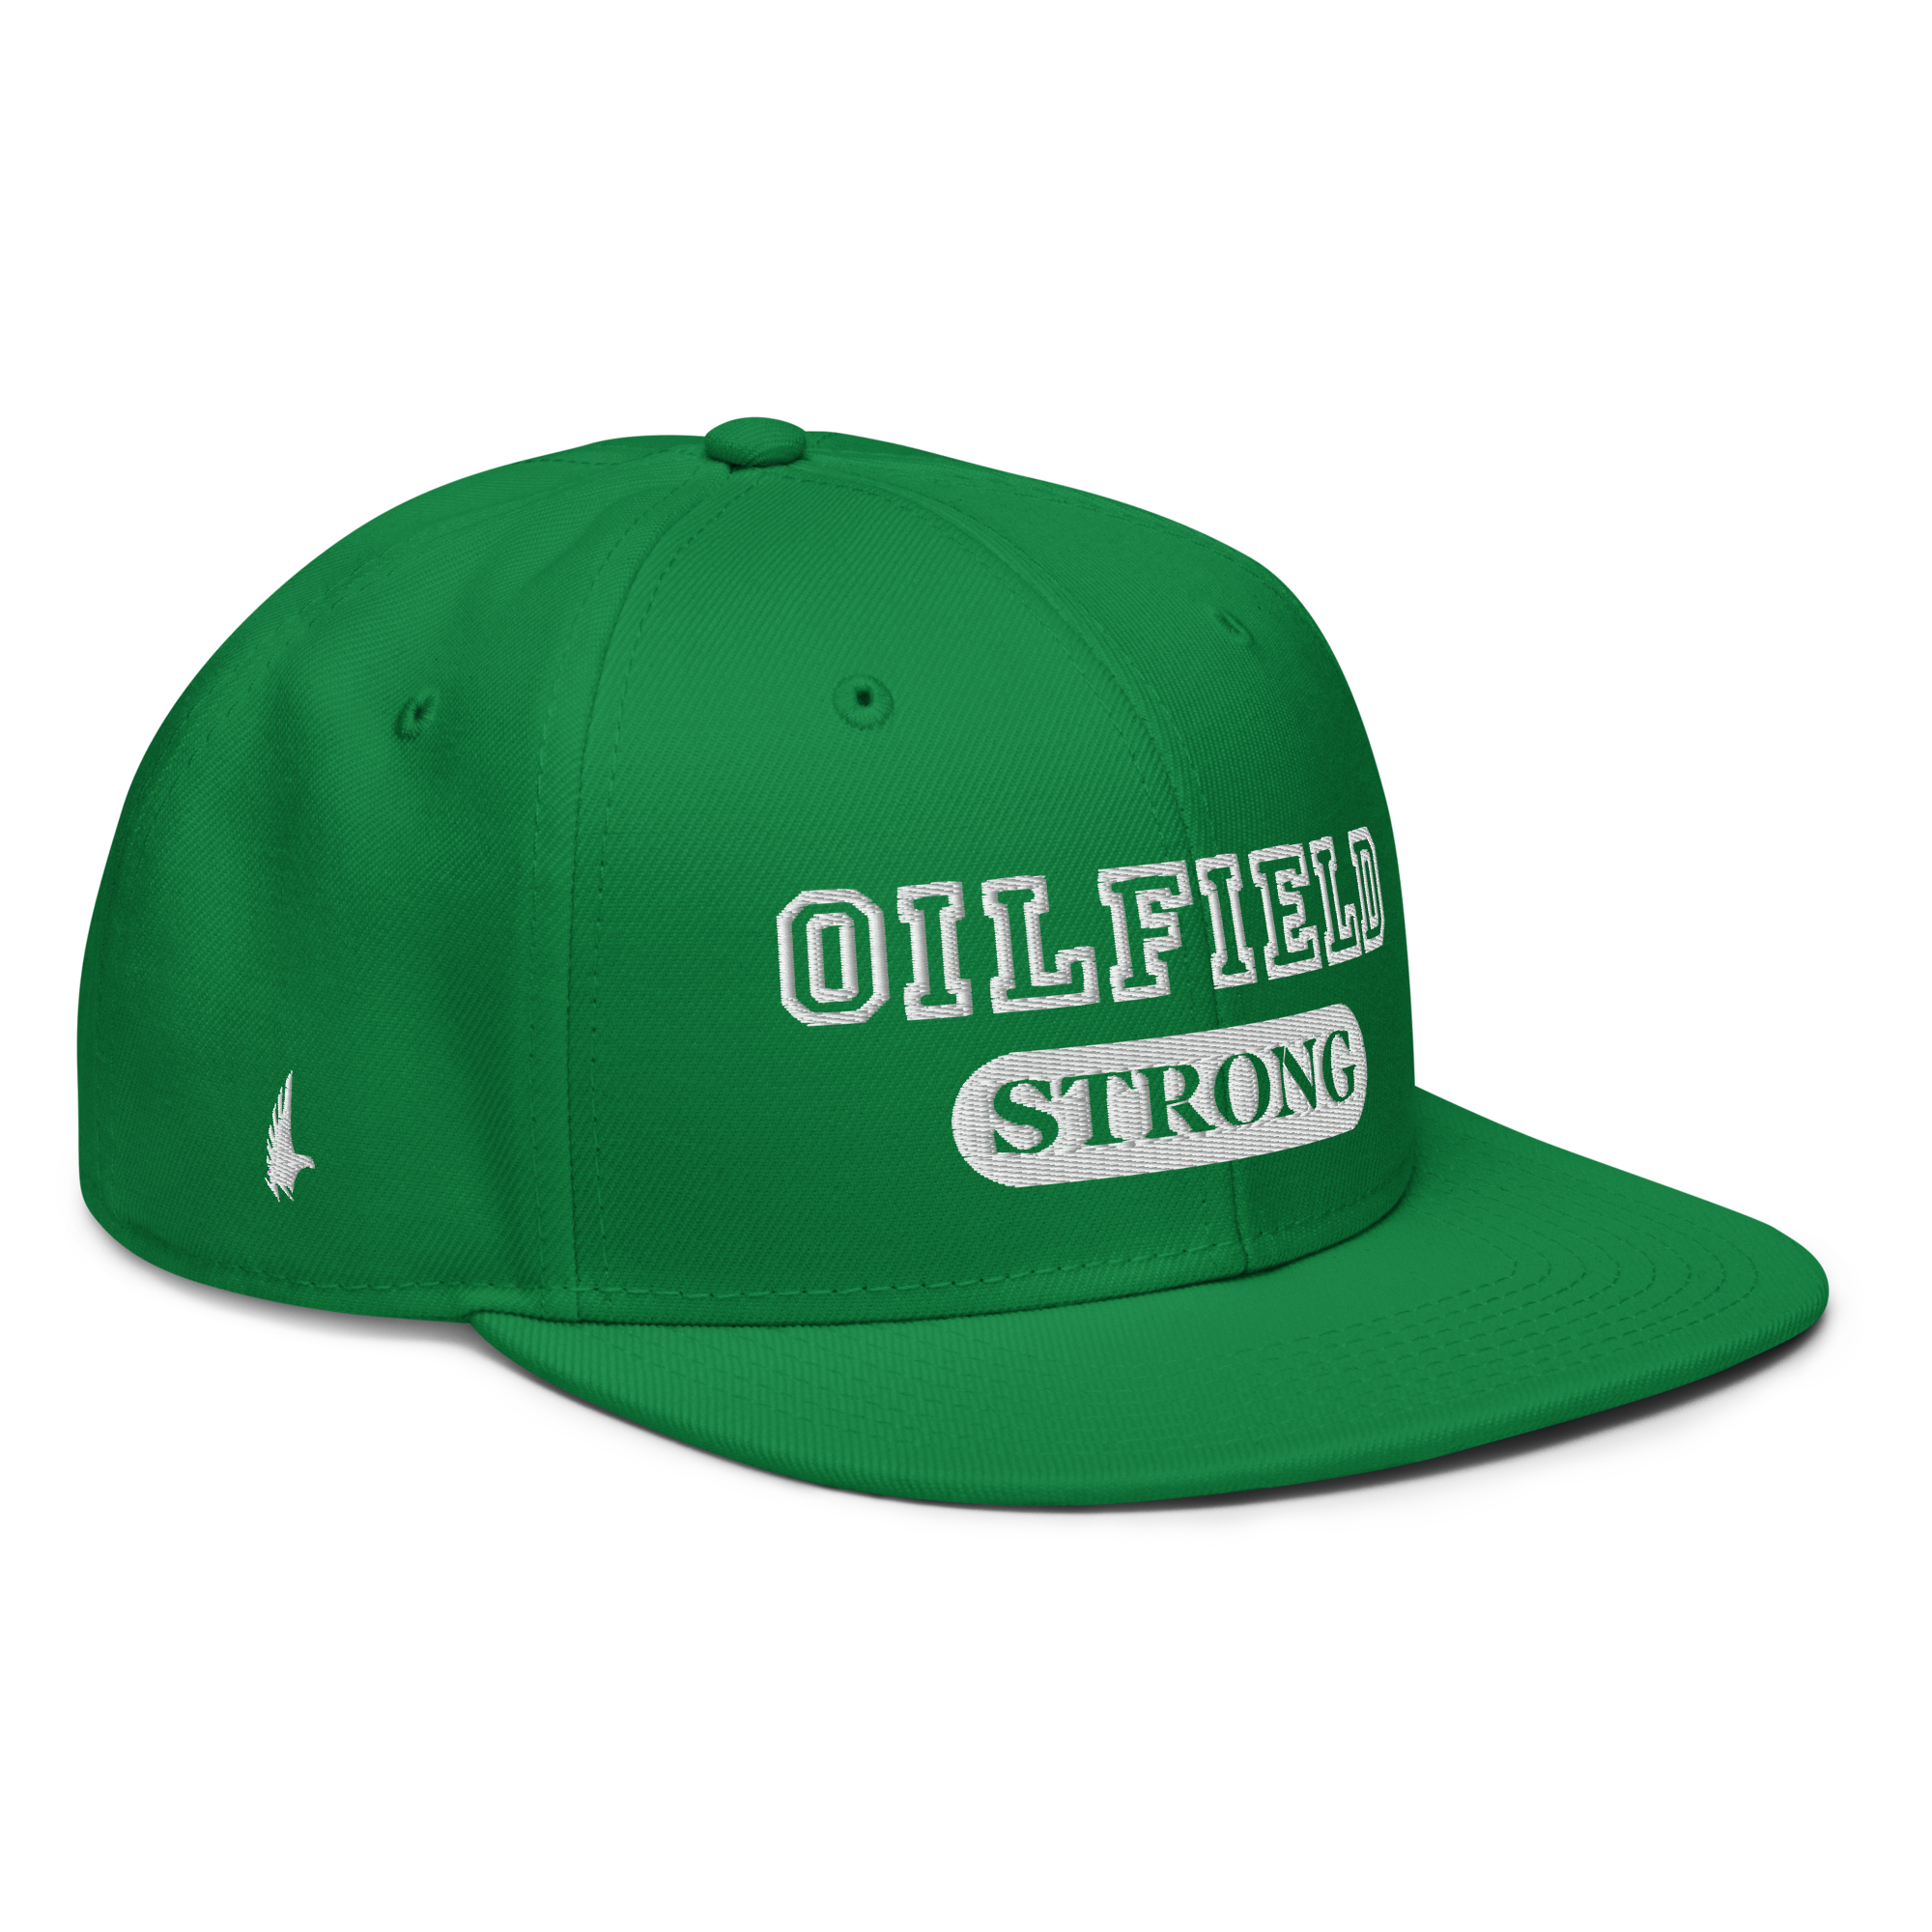 Oilfield Strong Snapback Hat - Green - Loyalty Vibes